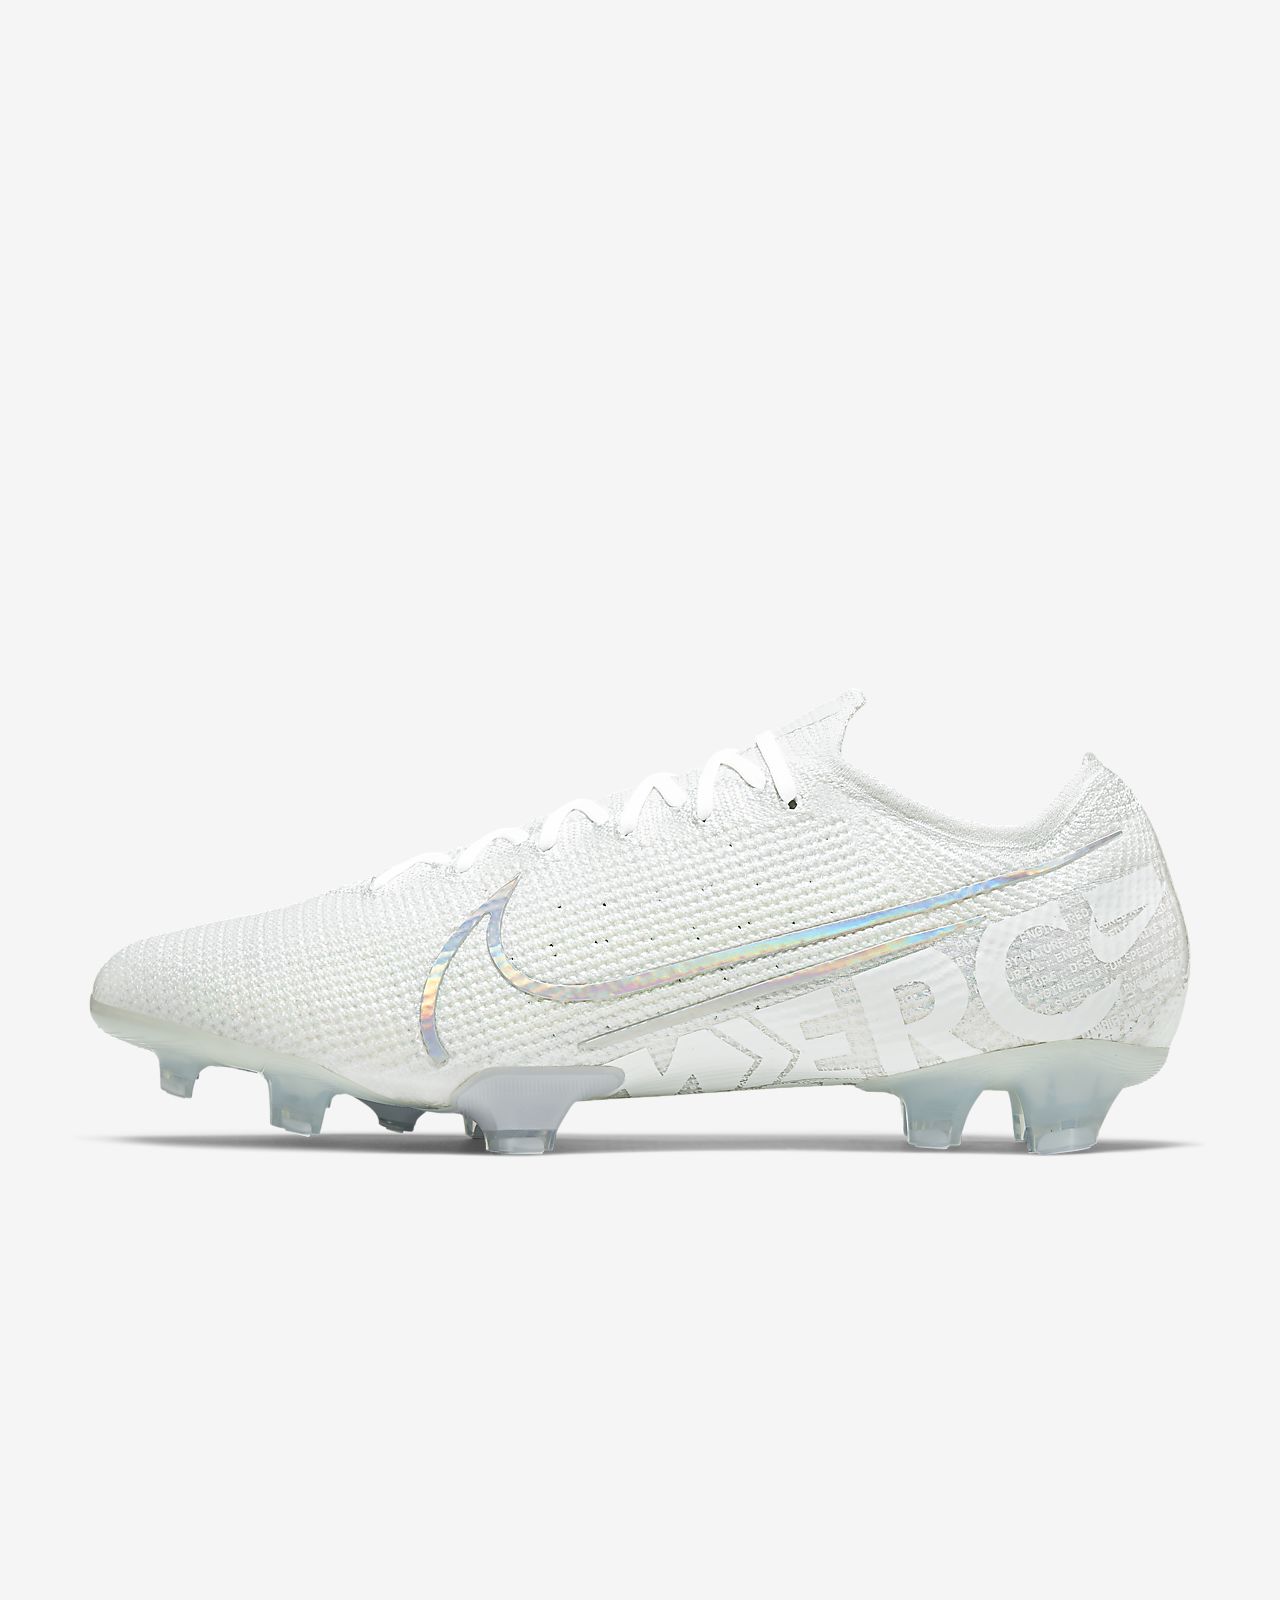 2019 Mercurial 360 Official Images and Release Date Nike